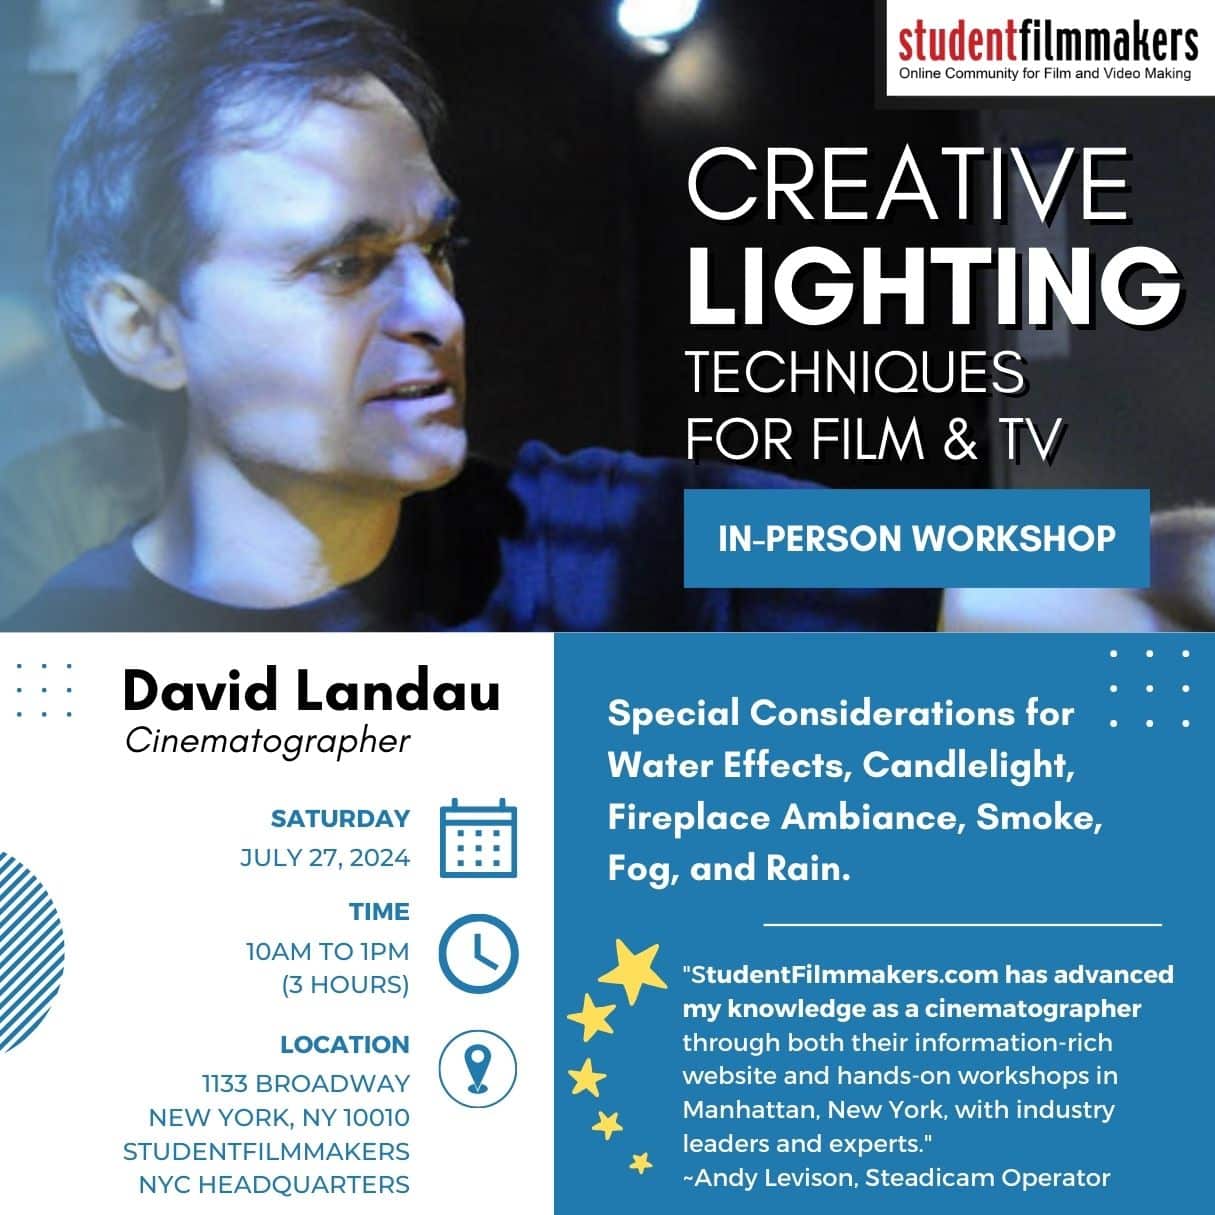 In-Person Workshop – “Creative Lighting Techniques for Film & TV” Led by David Landau – Manhattan, NYC, New York